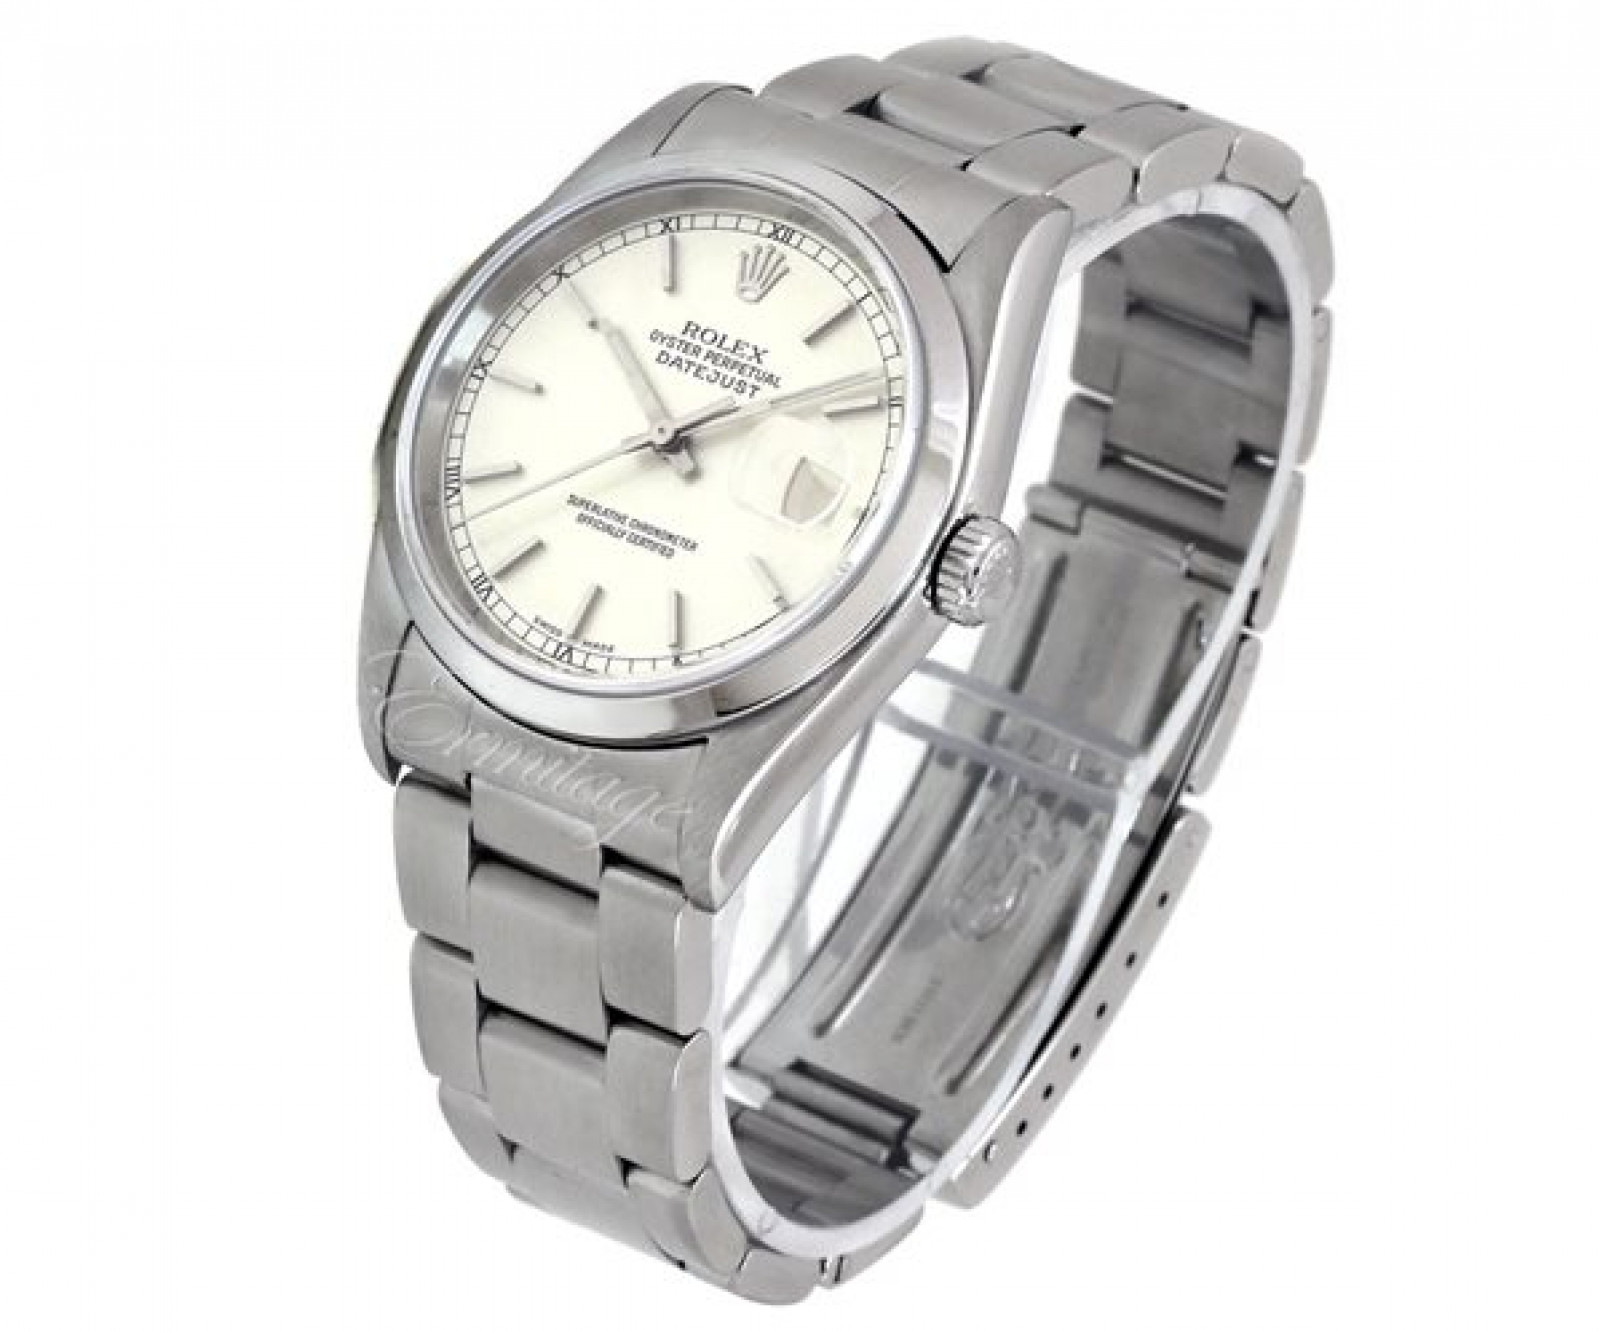 Rolex Datejust 16200 with Oyster Bracelet